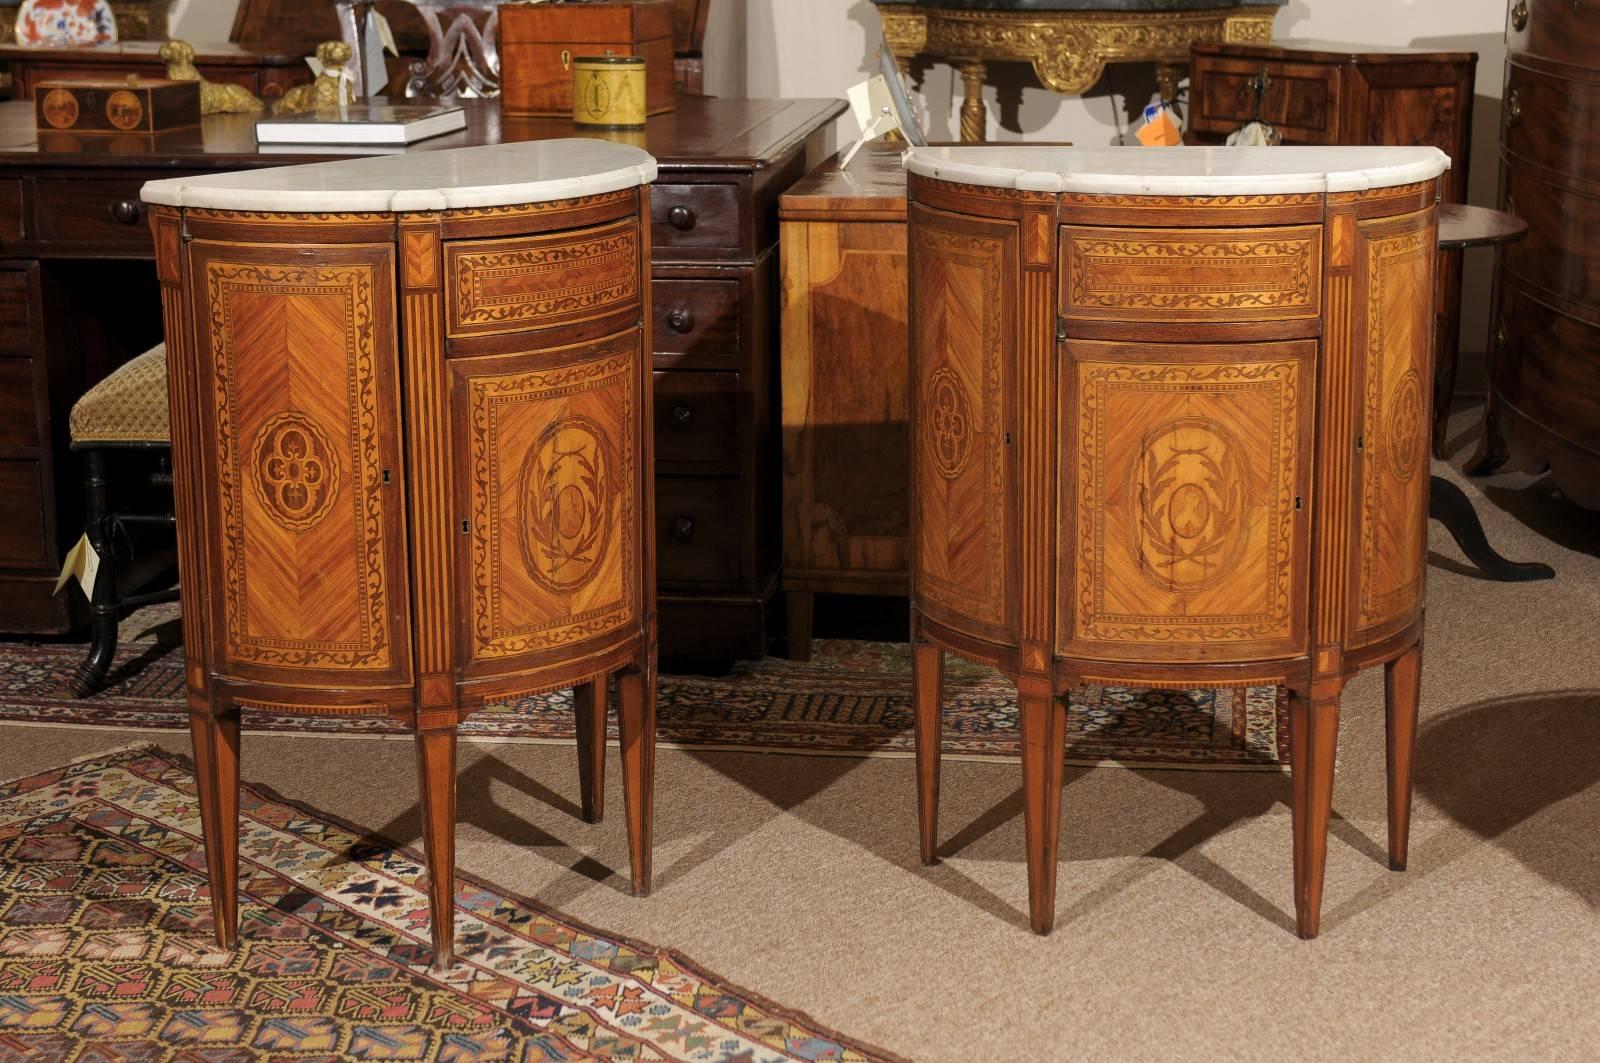 Pair of petite demilune-shaped cabinets with three doors, one drawer above the centre door and white marble tops, neoclassical style inlaid designs in kingwood, tulipwood and boxwood, Italy, circa 1940.